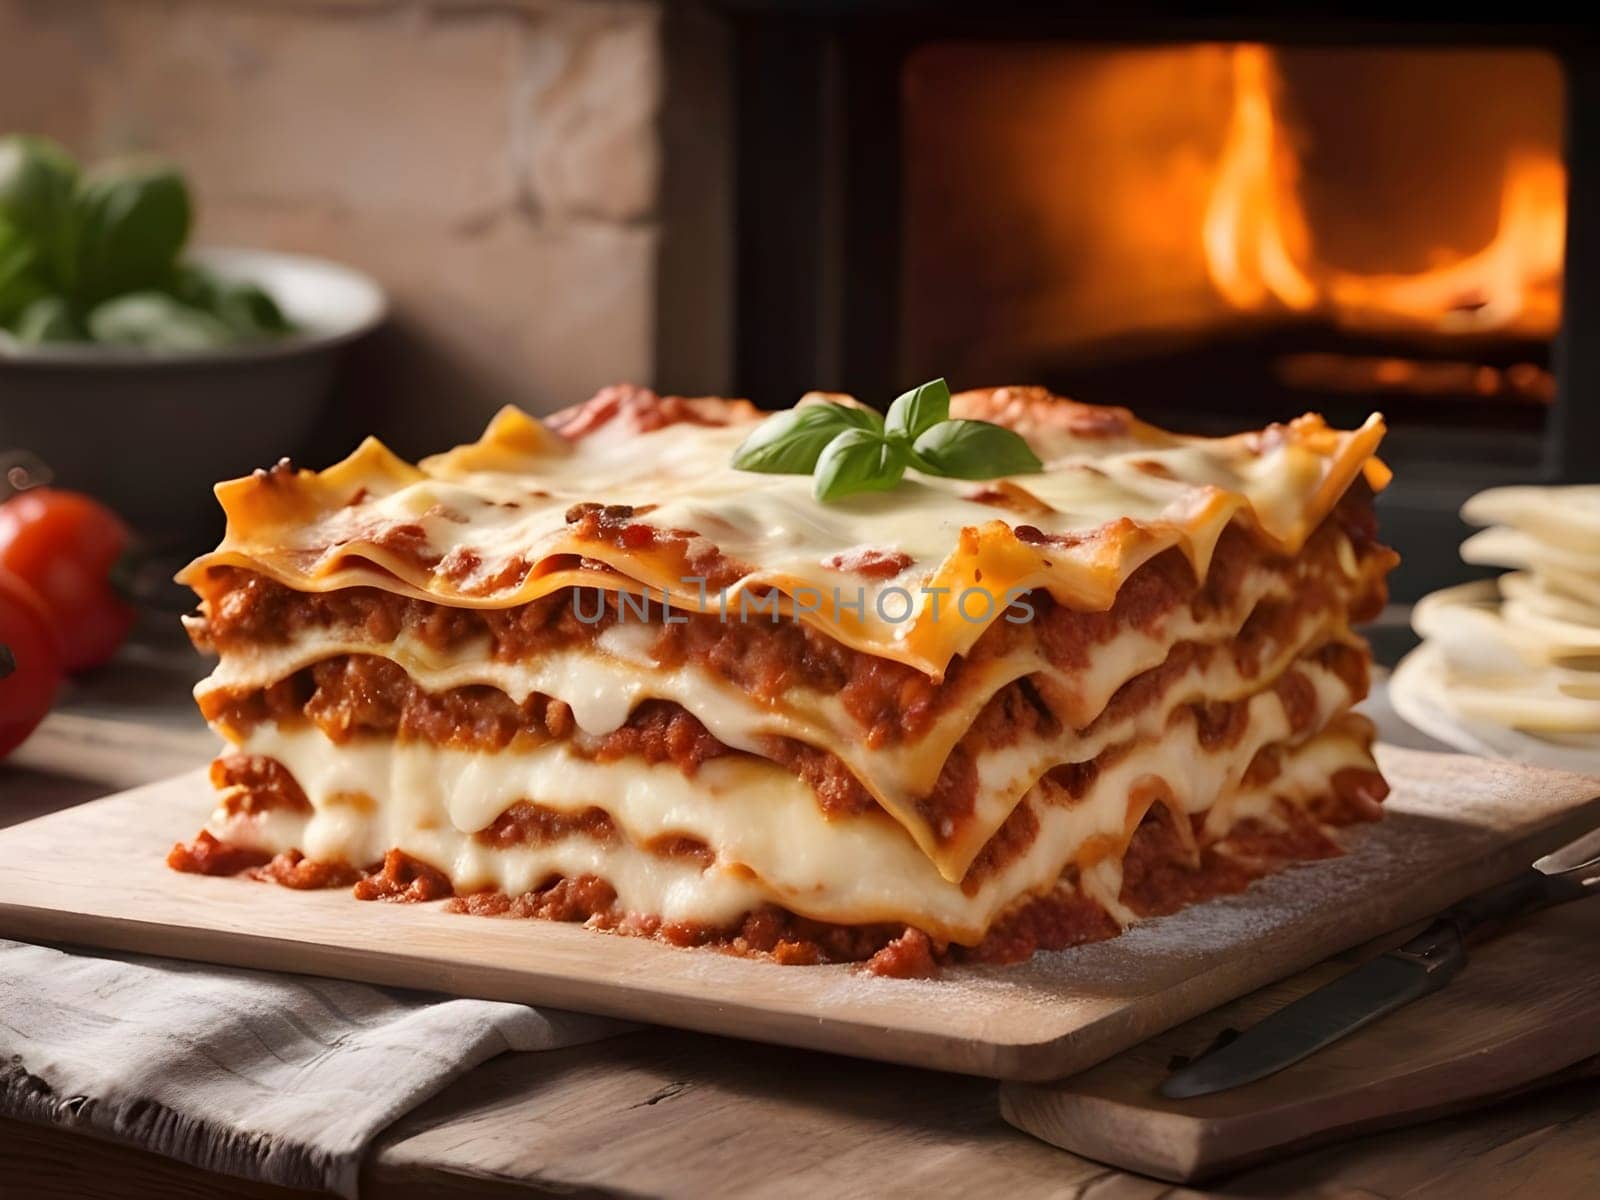 Freshly baked lasagna placed on a wooden table with the oven in the background.